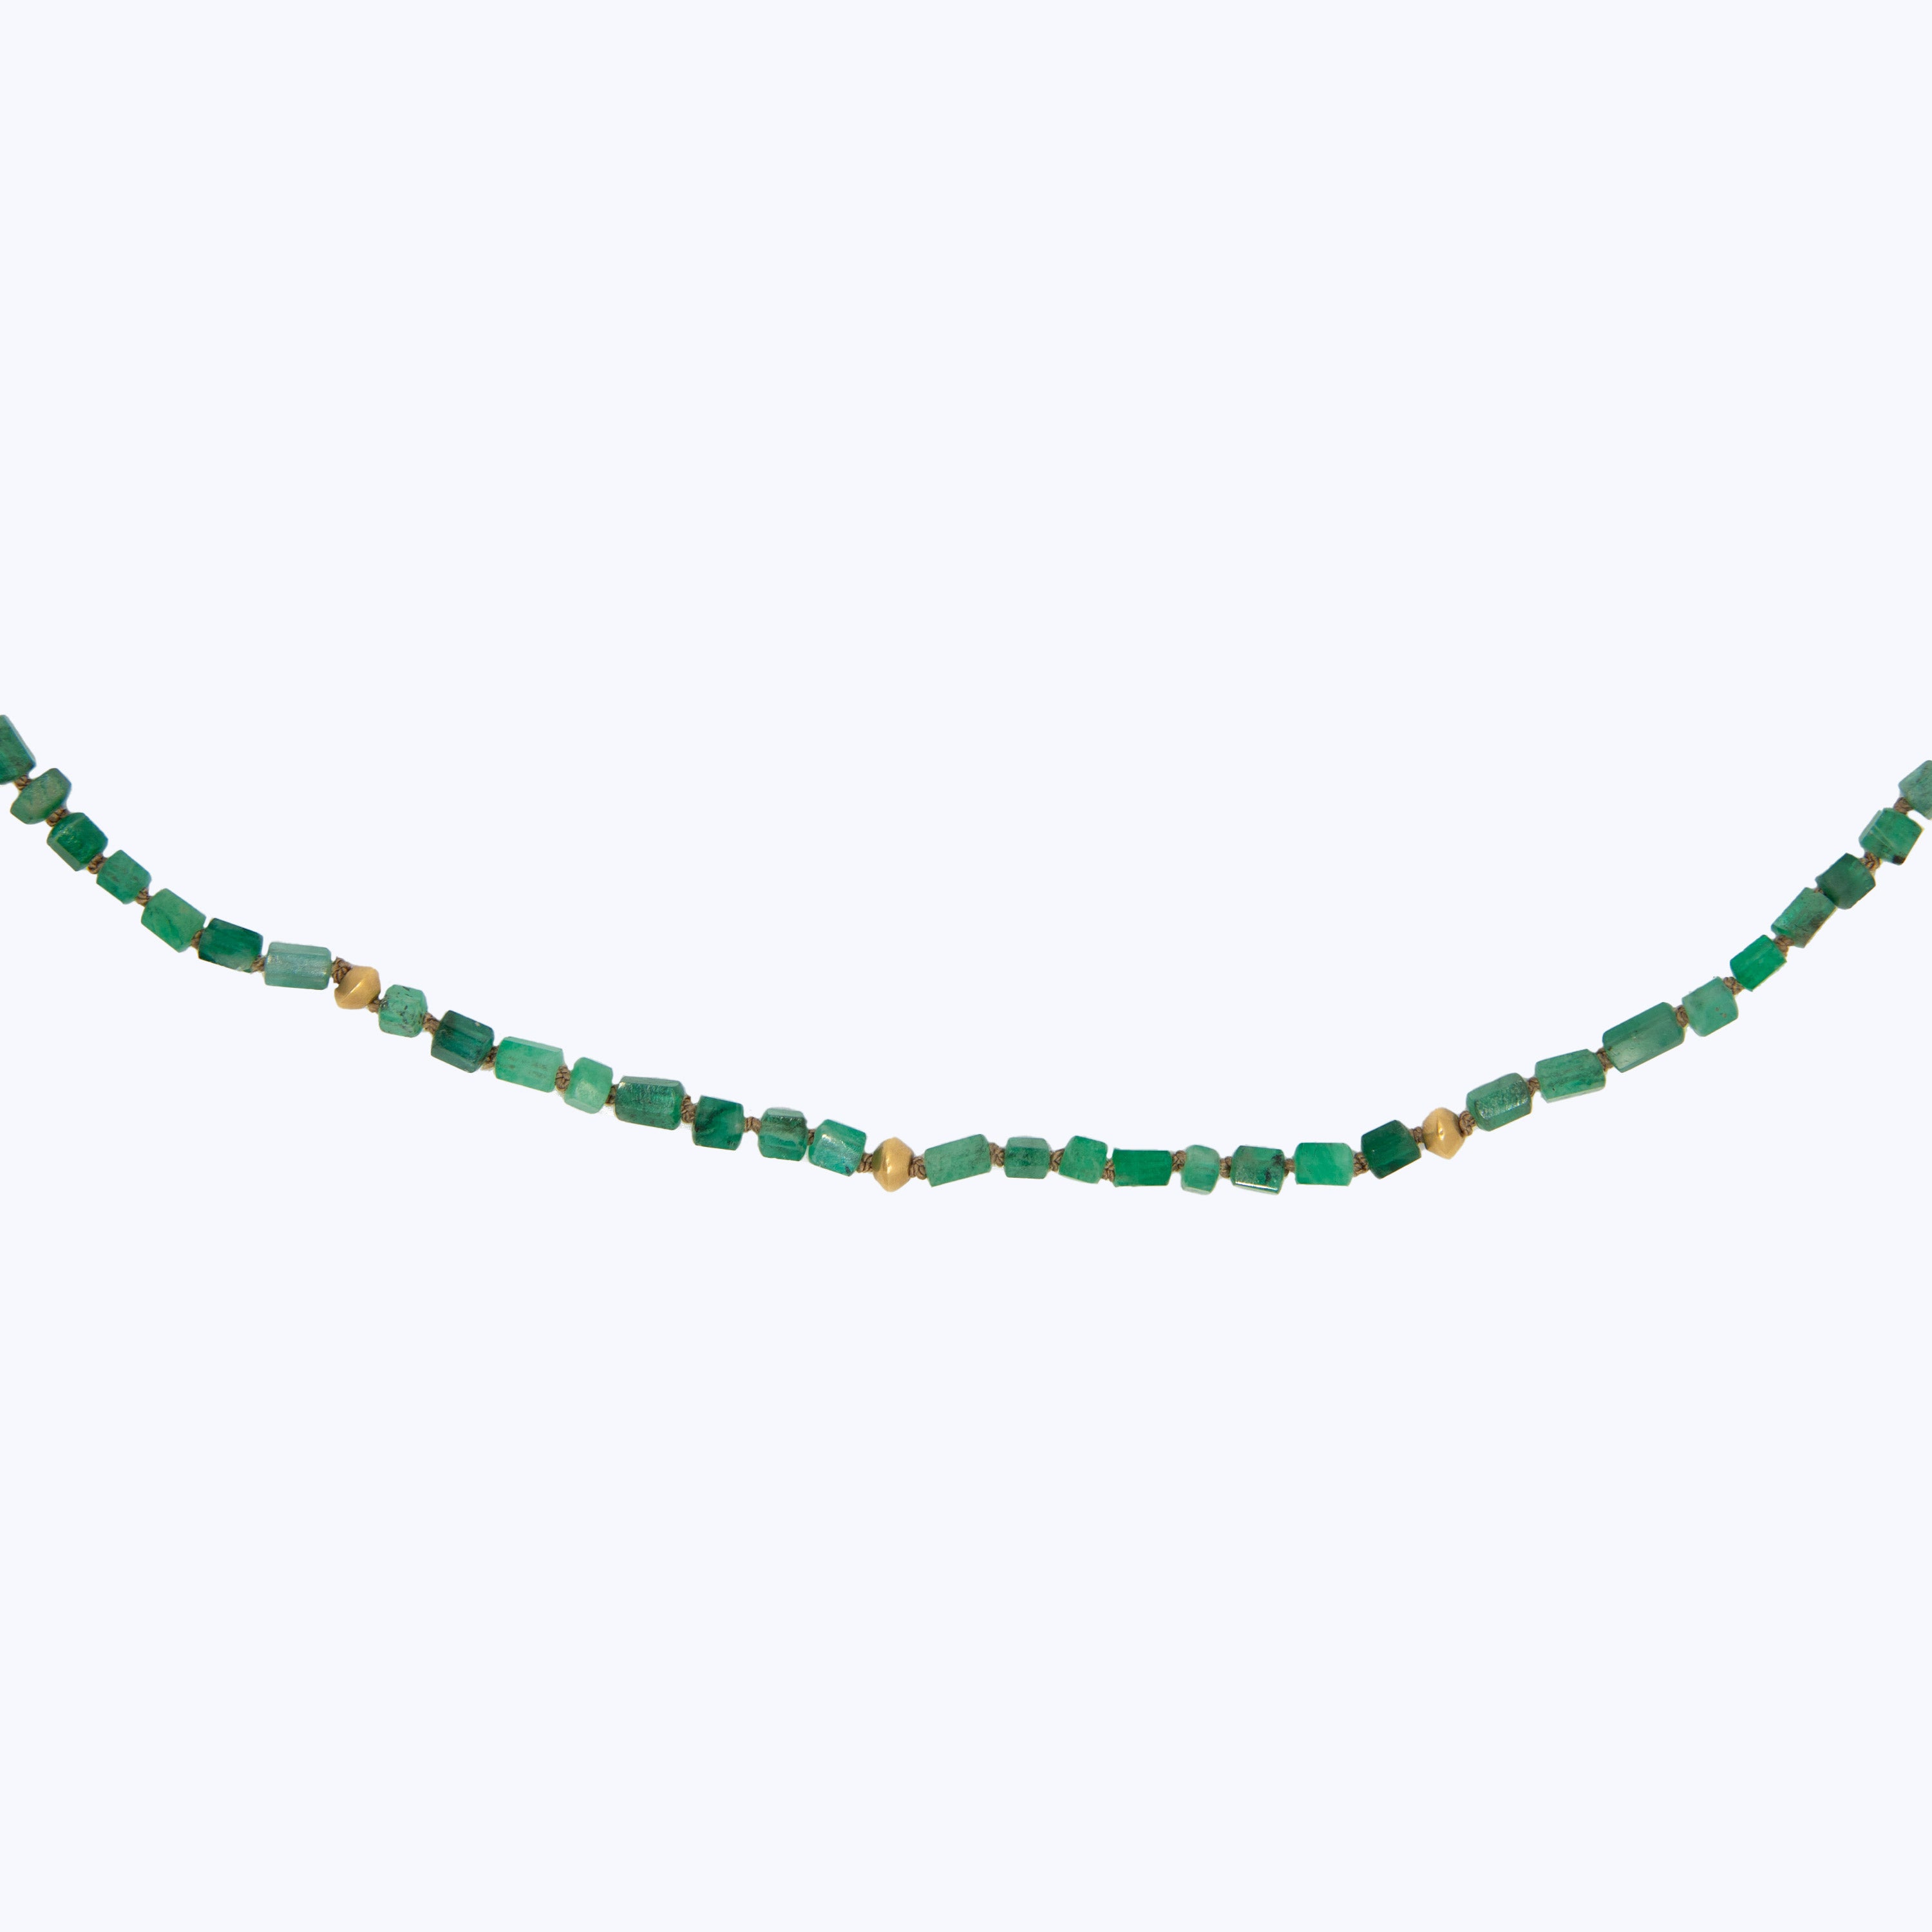 Beaded emerald crystals necklace, 5 22k beads